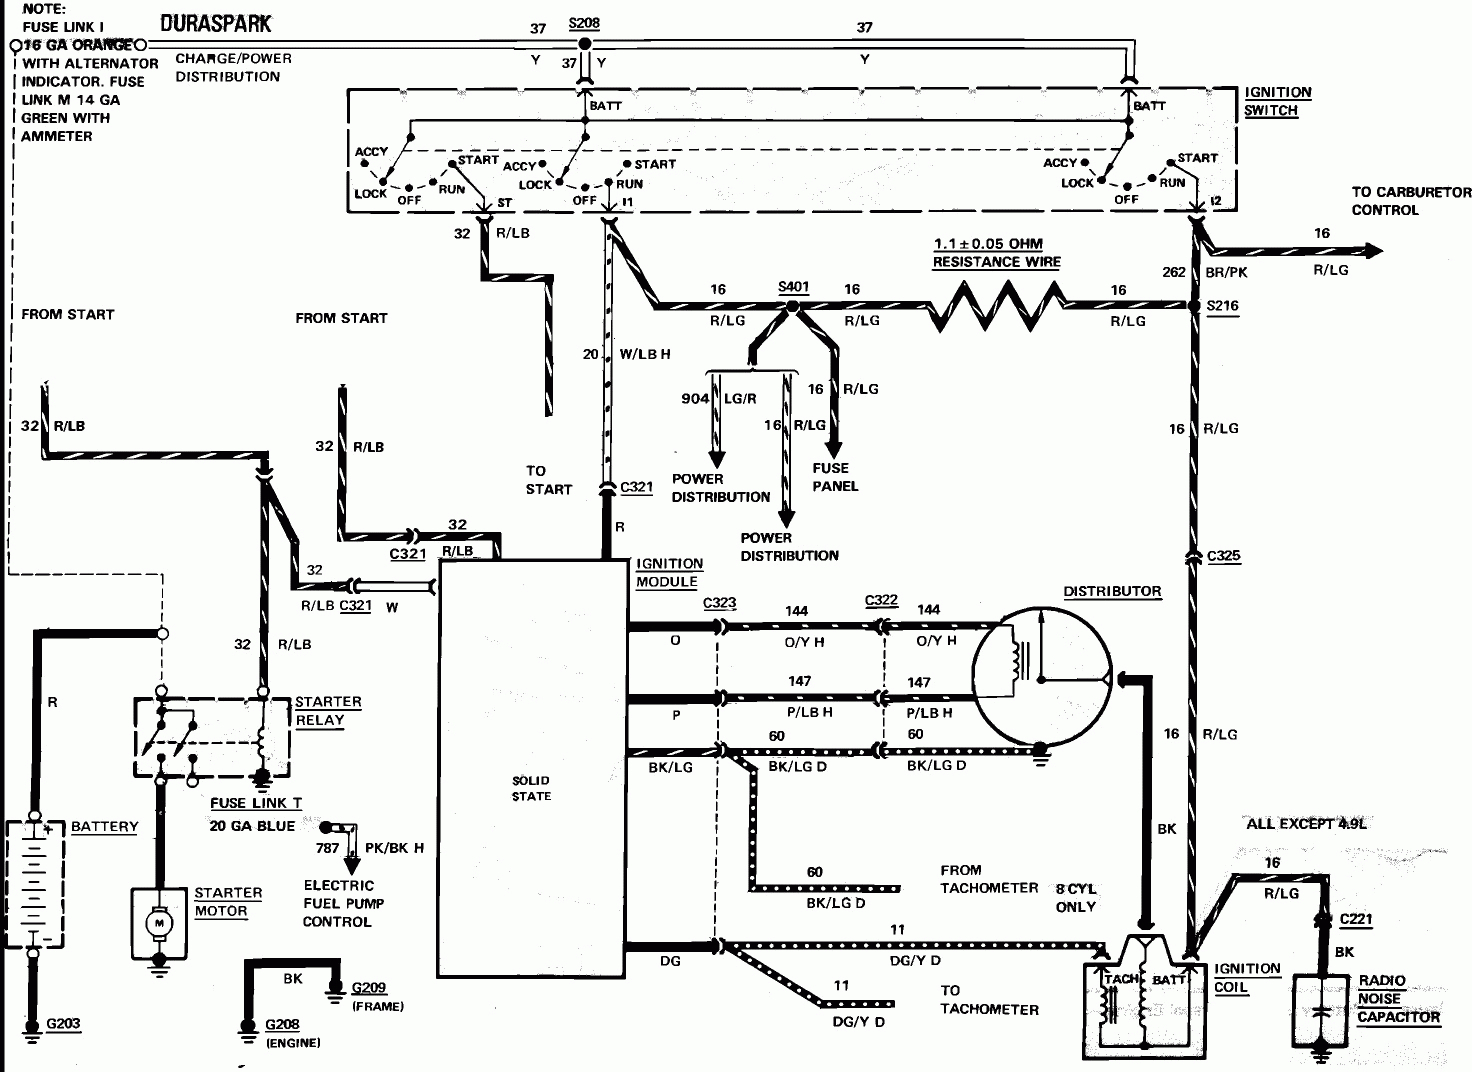 Ford Ignition Module Diagram - Wiring Diagrams Hubs - Ignition Wiring Diagram